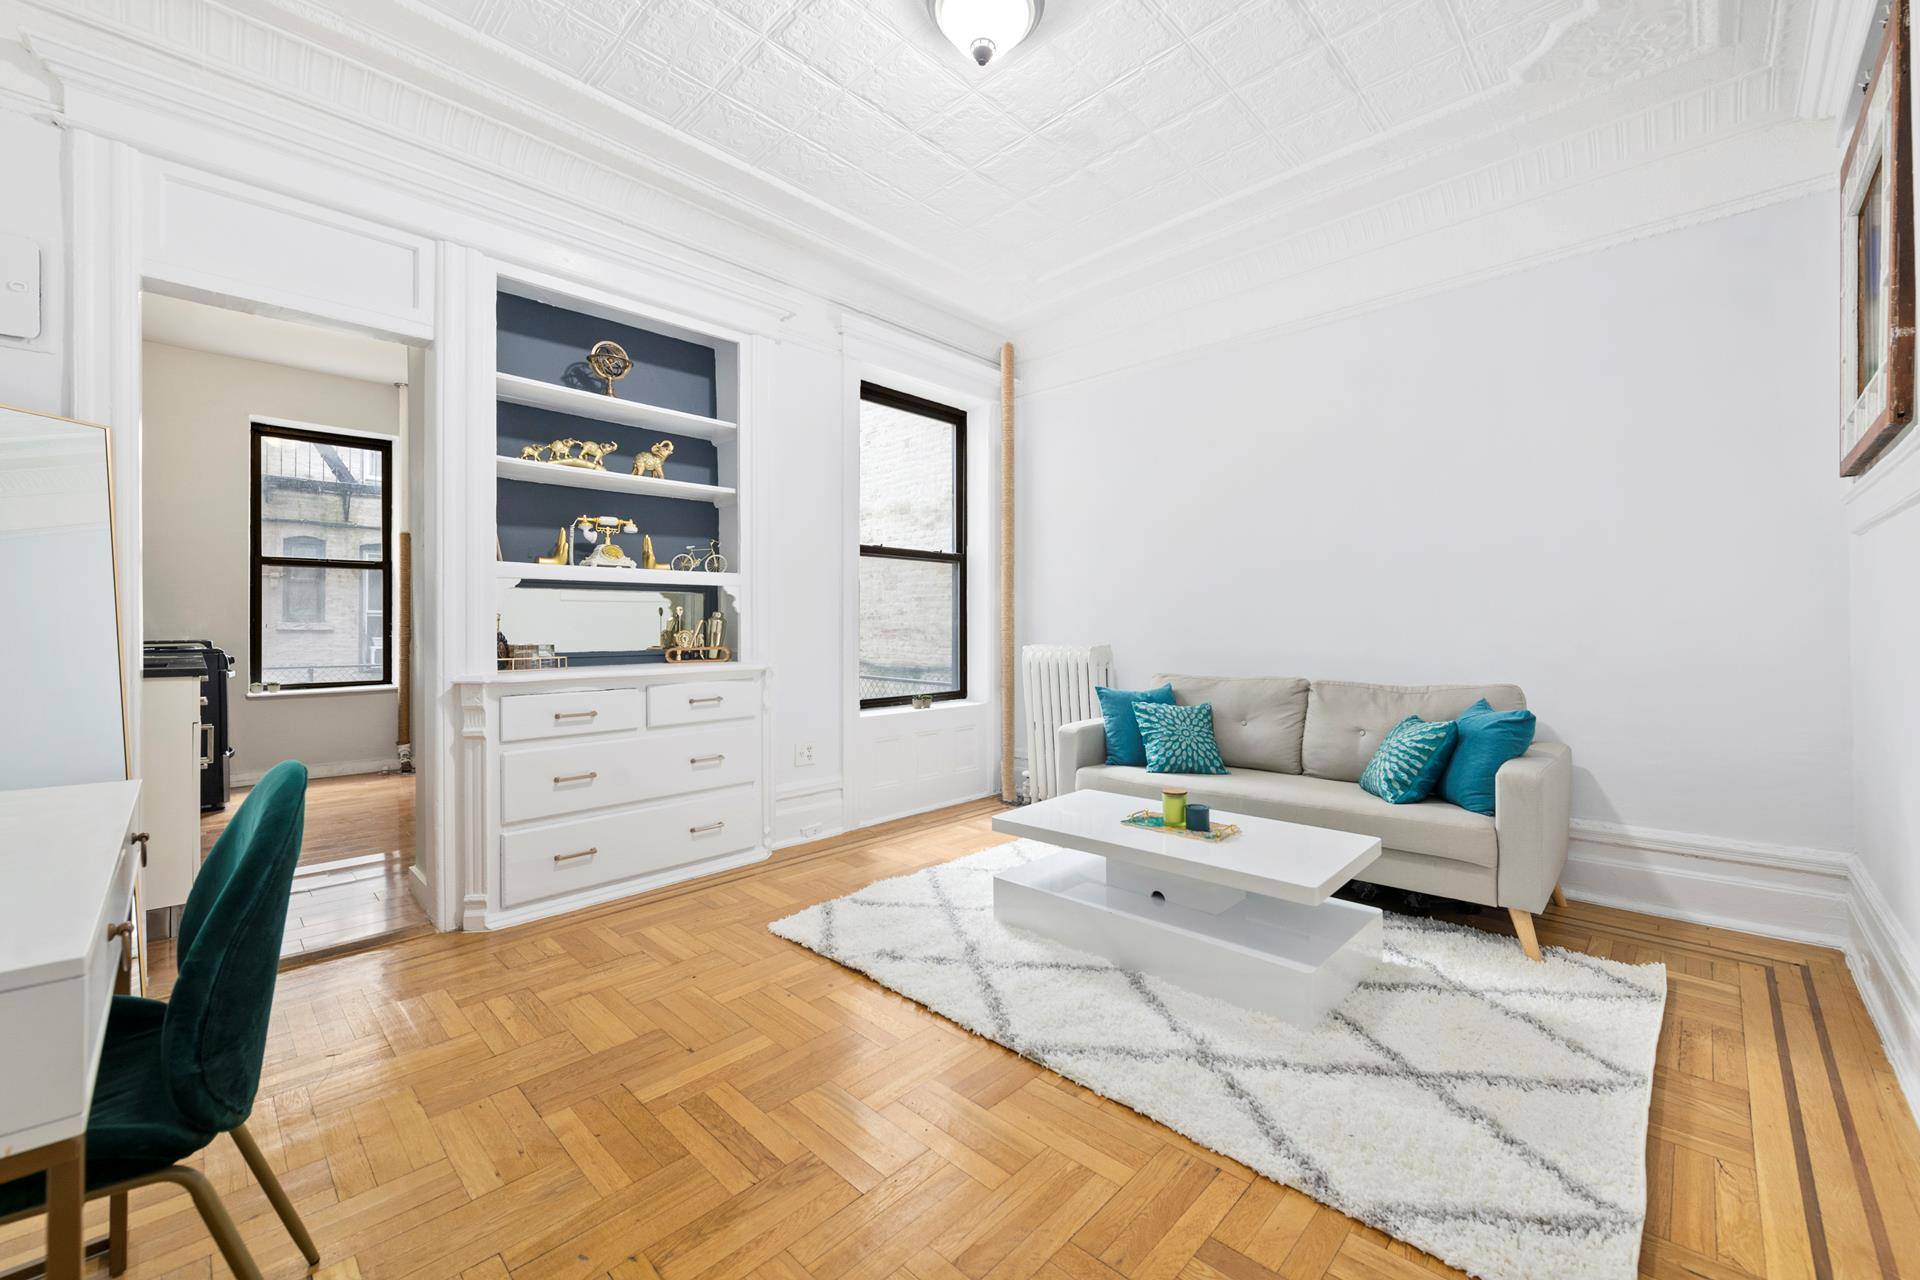 Located between Prospect Park West and 8th Avenue, 527 8th Street is a prime Park Slope cooperative building on one of the prettiest tree lined blocks.